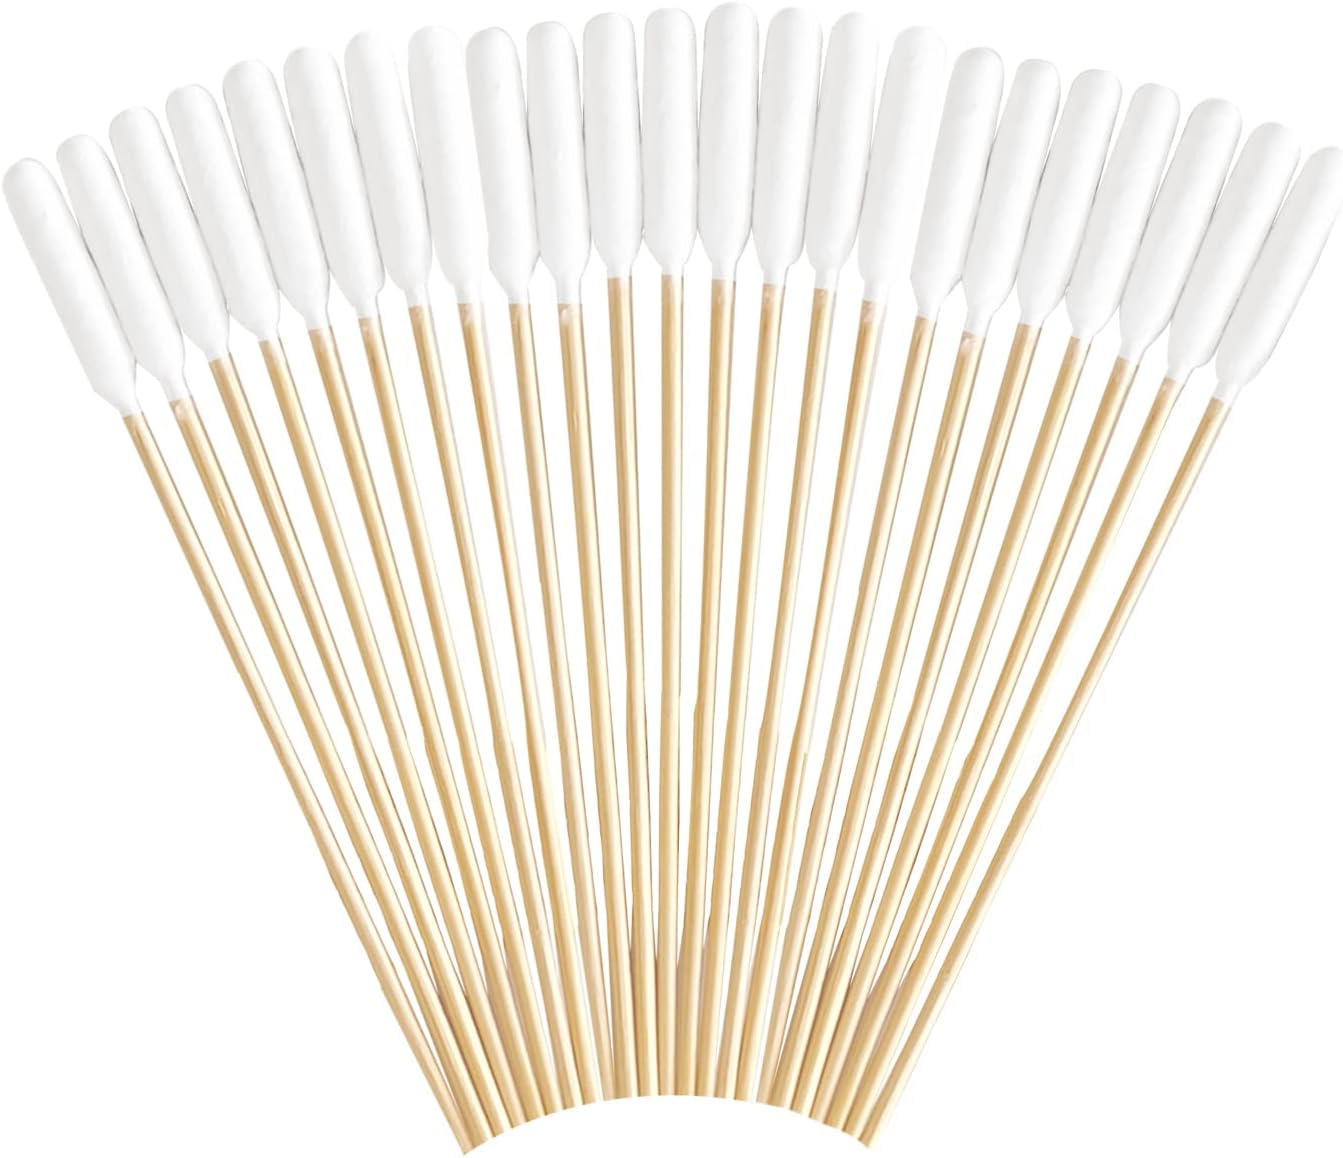 6 Inch Long Cotton Swabs for Dogs ,Cat,Small Pet Ears Cleaning, Pet Cotton Ear Buds Swabs,Ear Cleaning Swabs with Bamboo Handle,Apply for Daily Ear Cleaning Removes Wax, Dirt (100pcs)